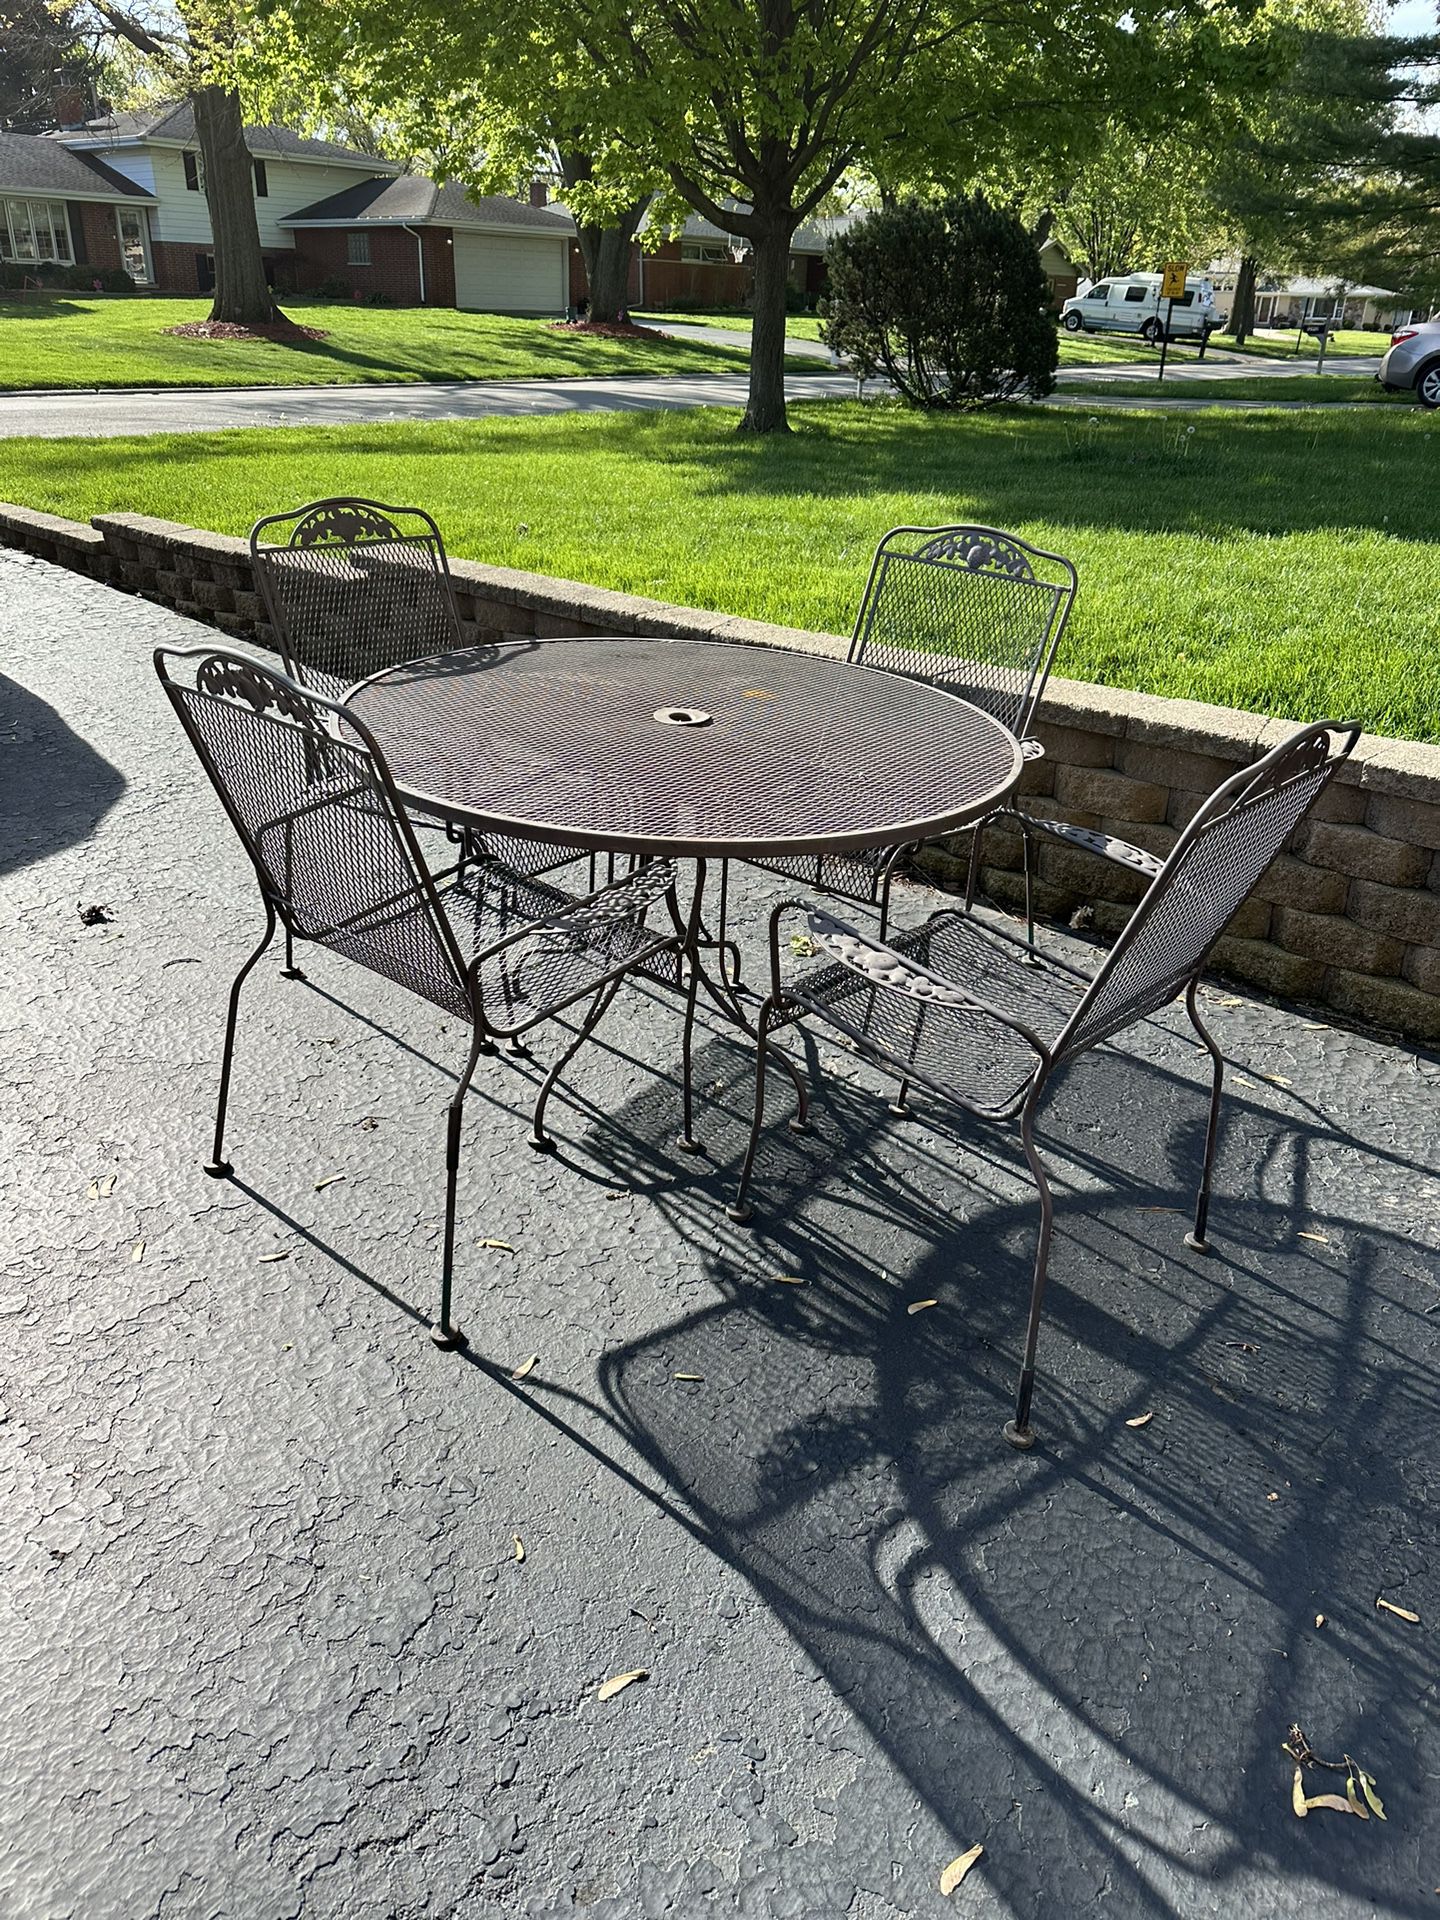 Wrought Iron Patio Set, Table With 4 Chairs 